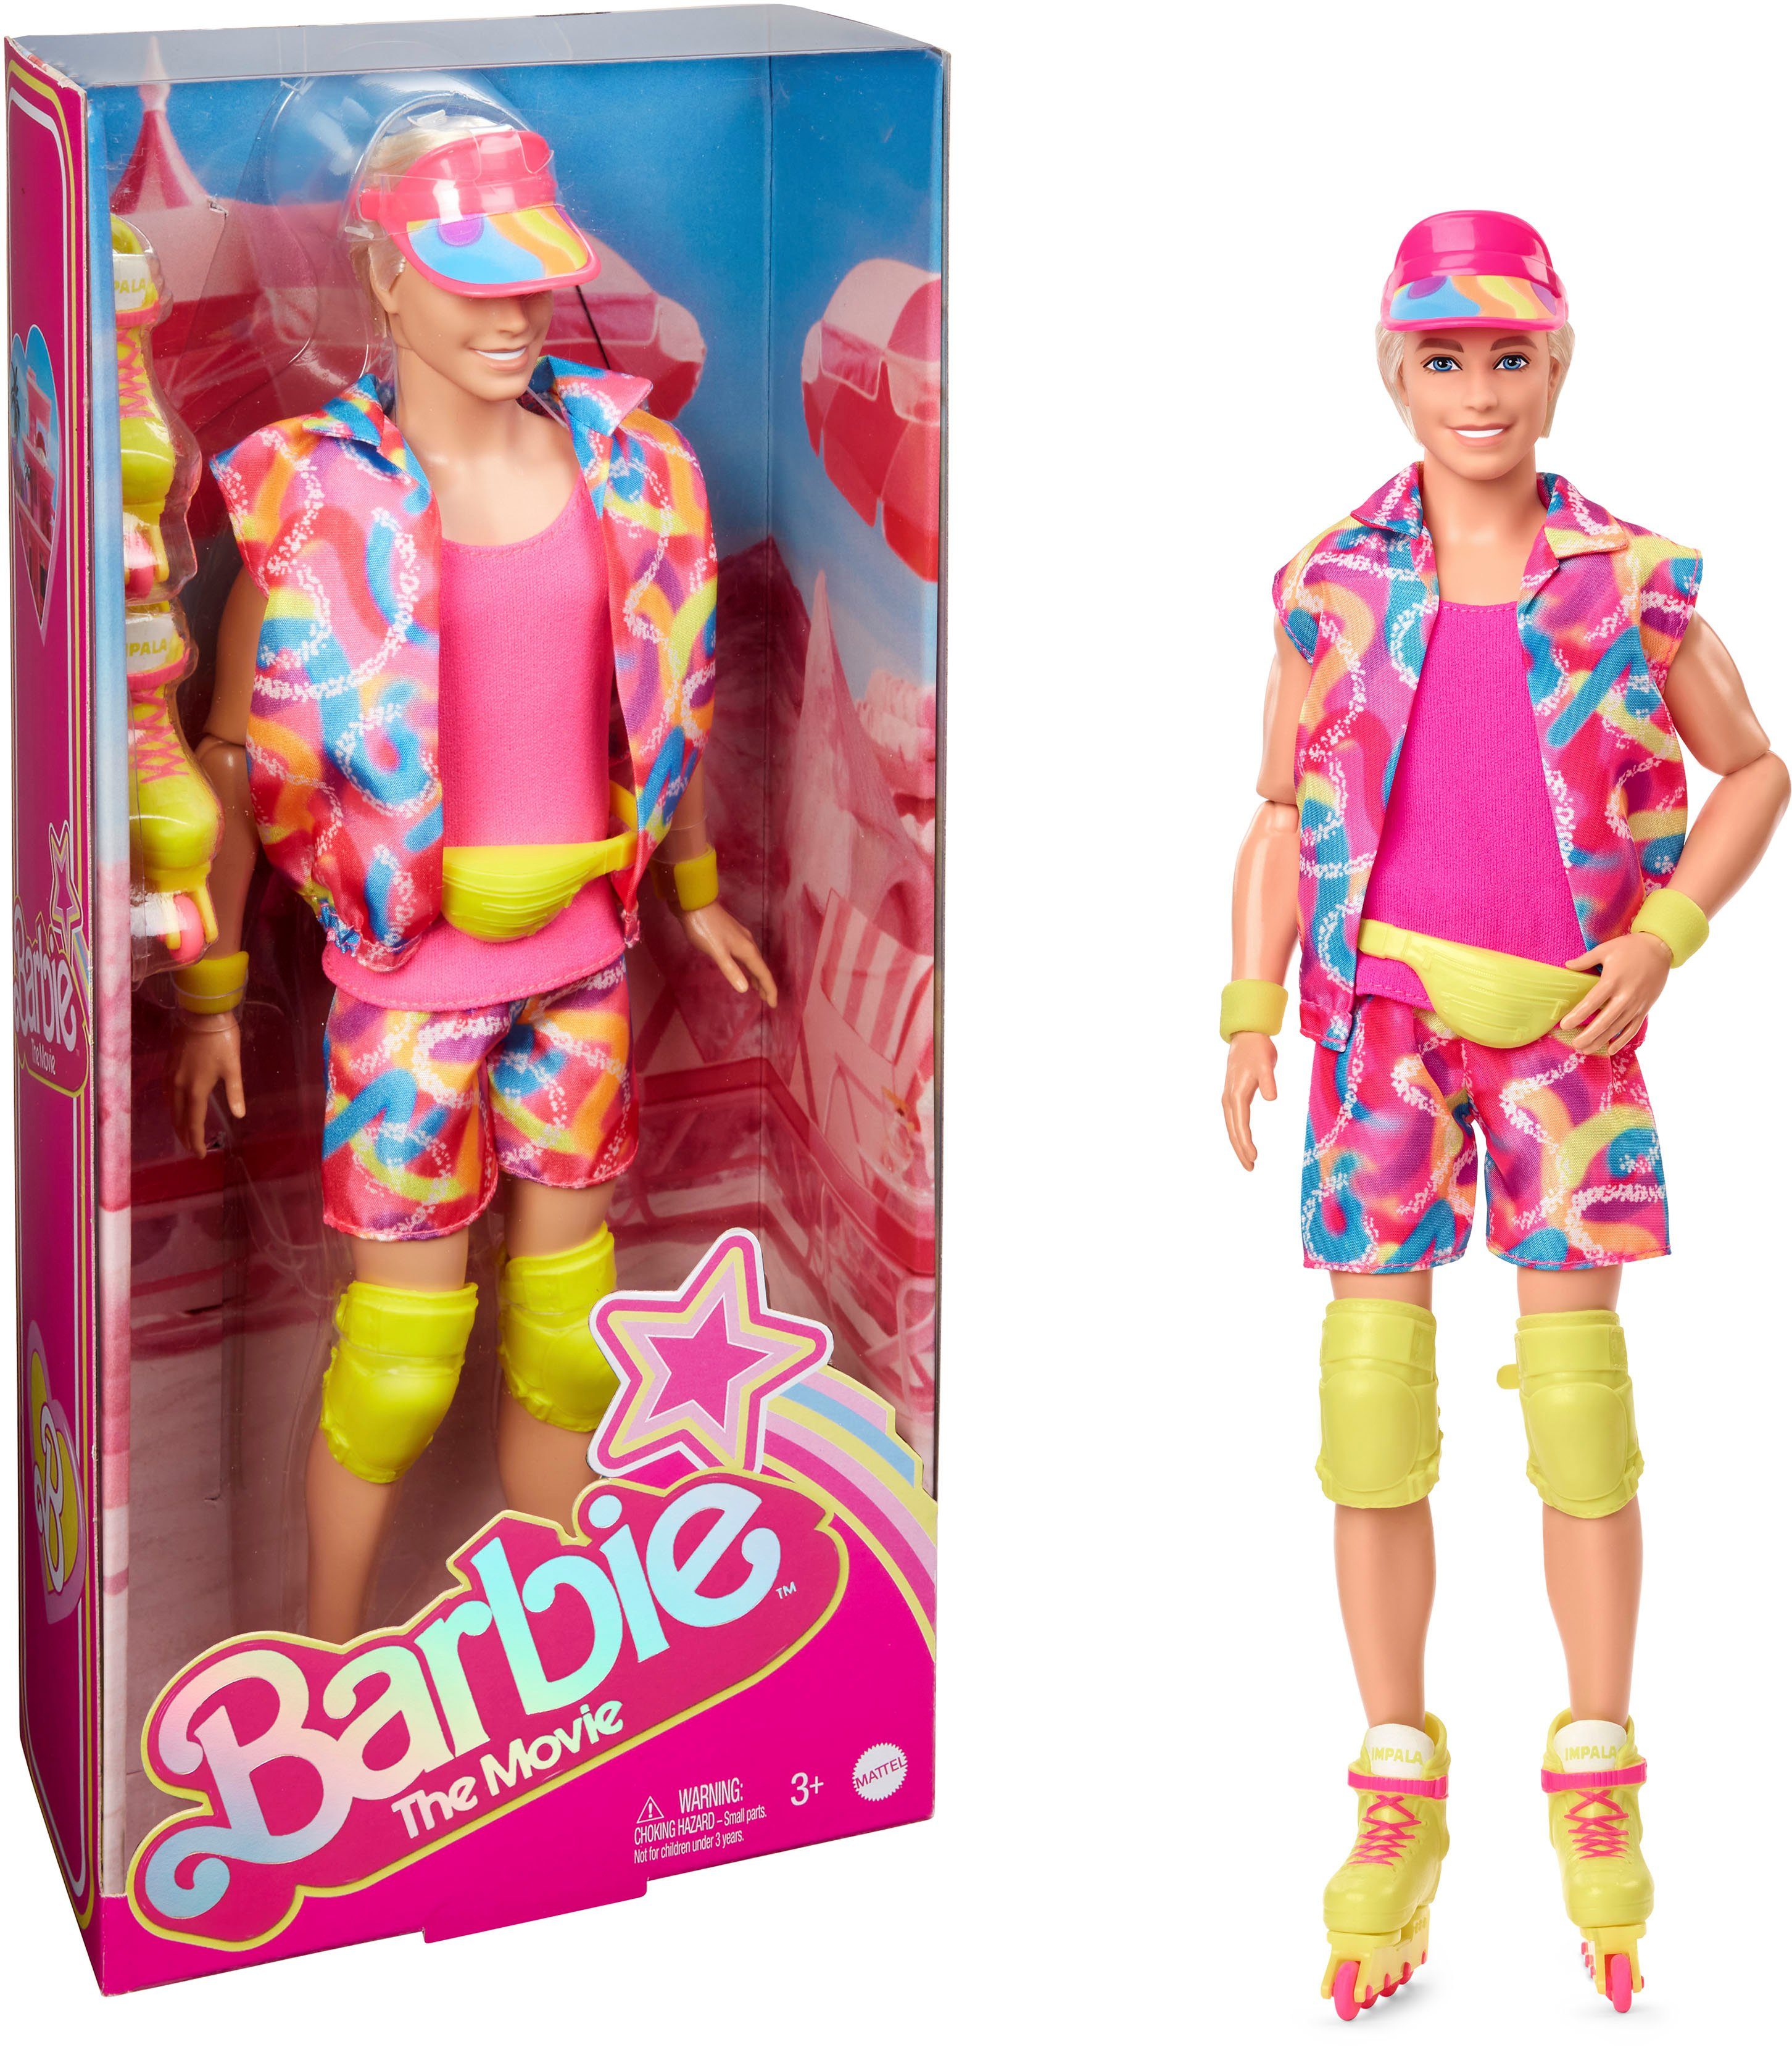 Barbie Anziehpuppe Barbie Signature The Movie, Ken im Inlineskating-Outfit